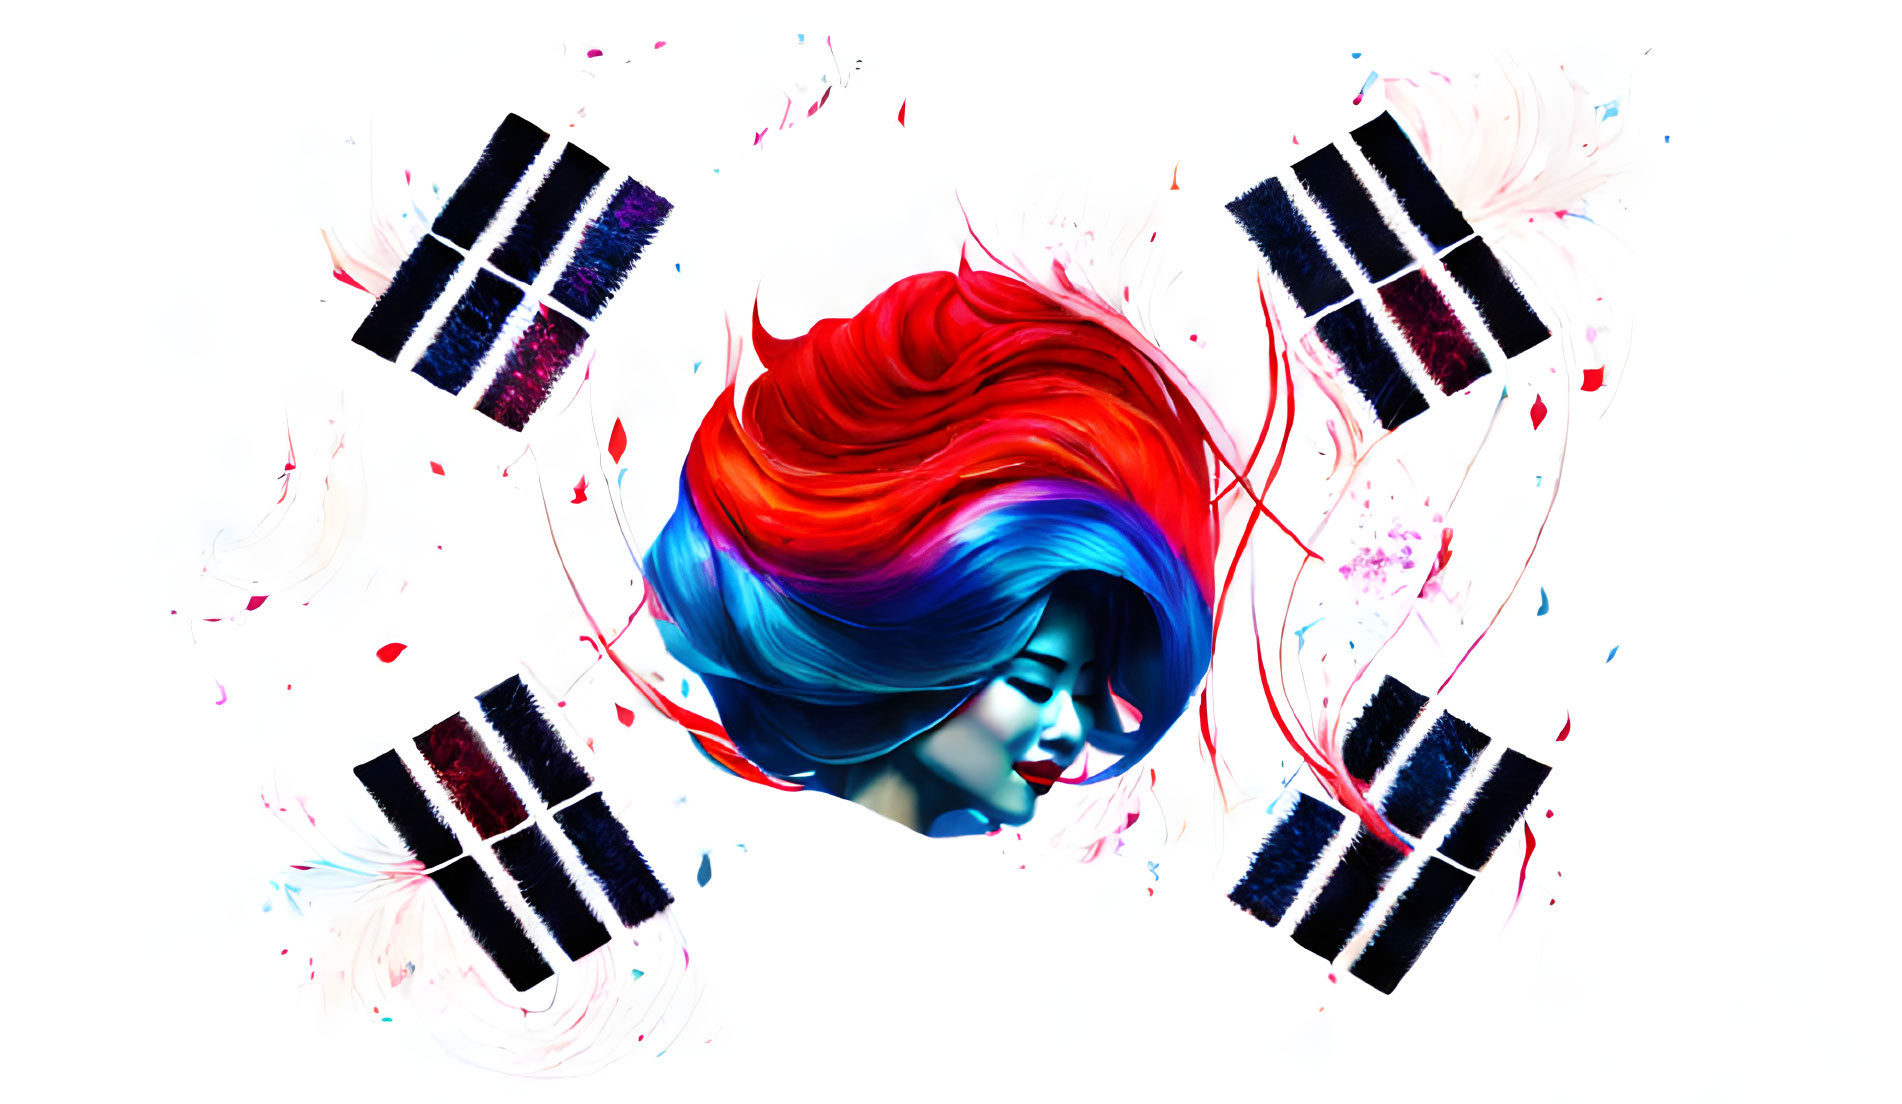 Vibrant digital artwork of woman with red and blue hair and abstract elements